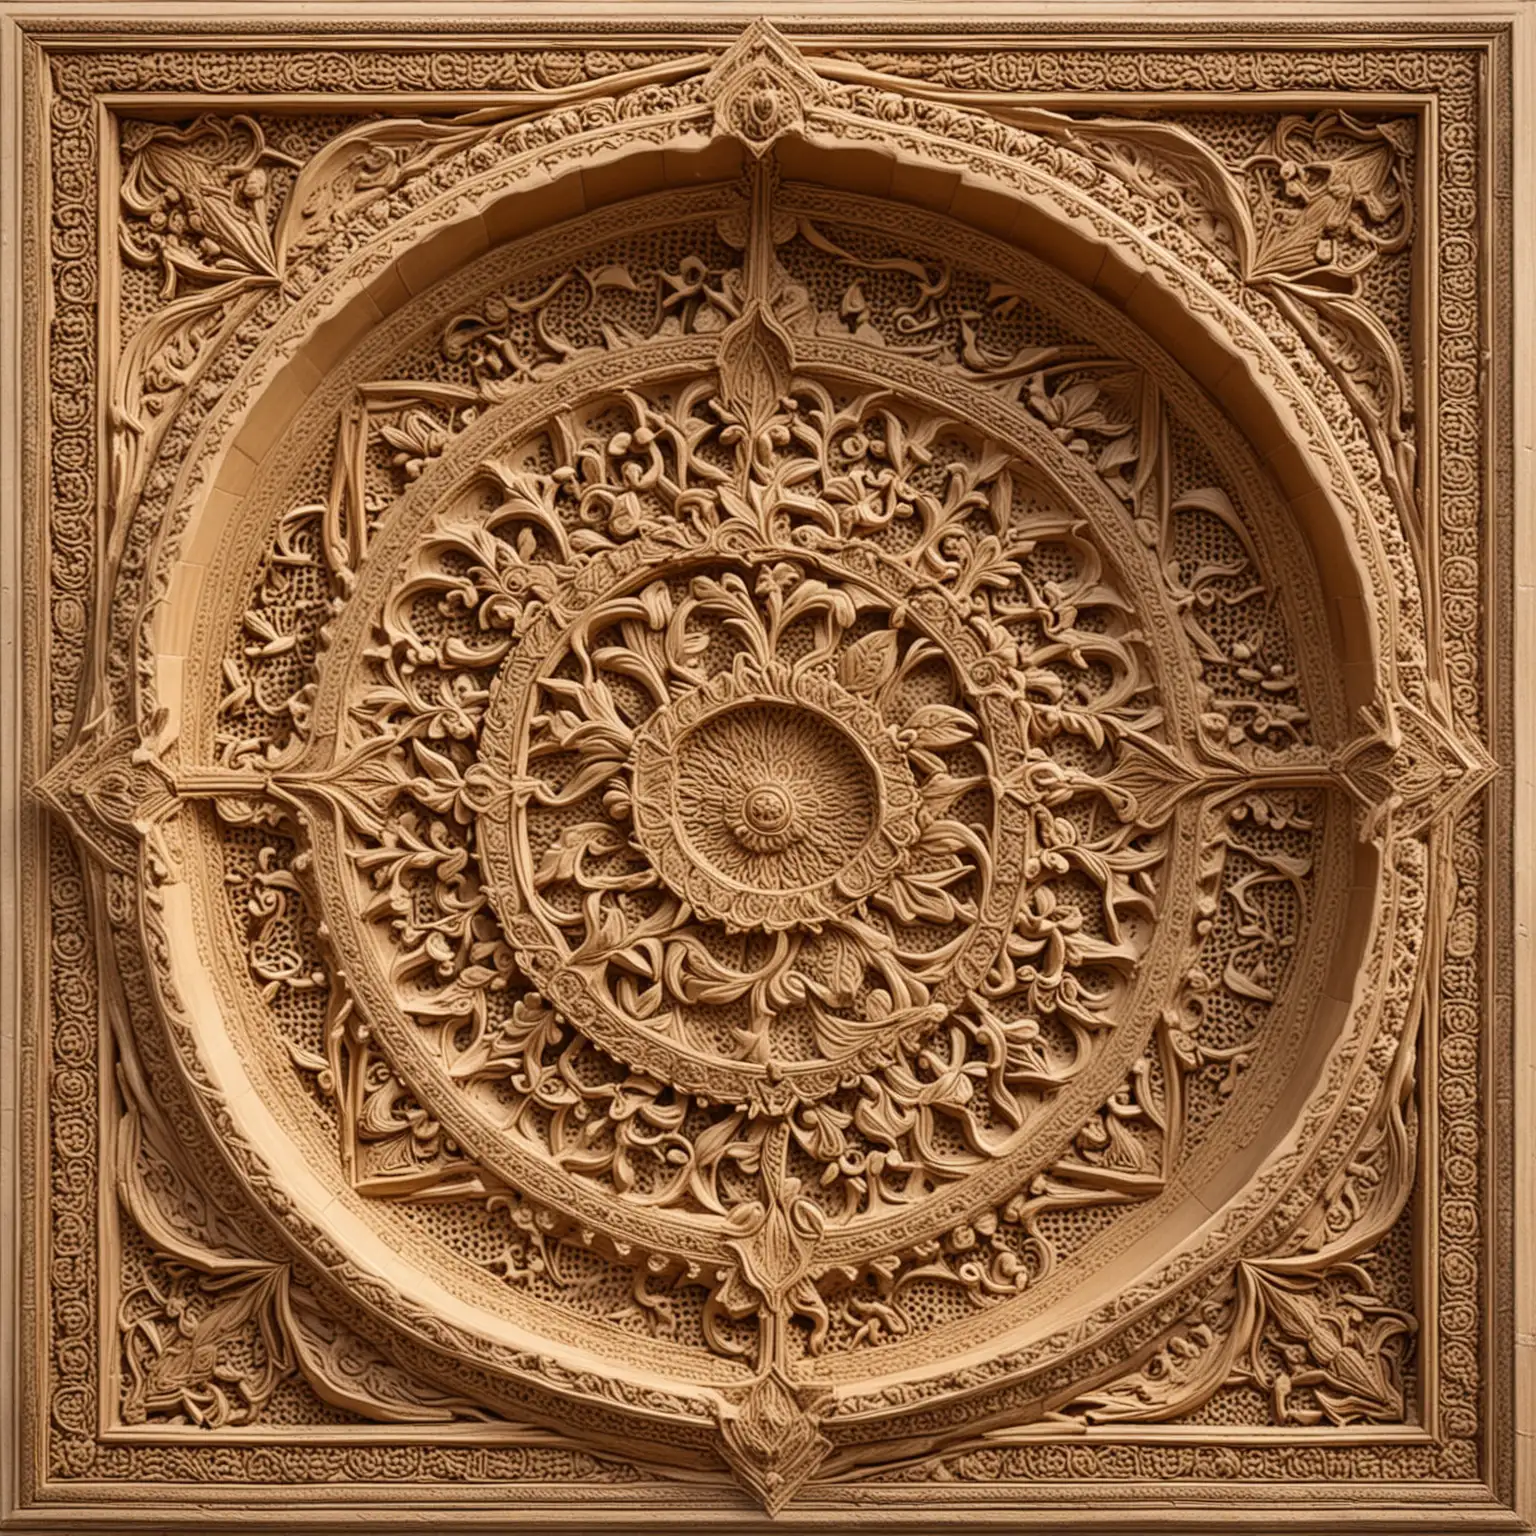 3d painted, decorative panel in the style of the interior walls of Jaisalmer Fort